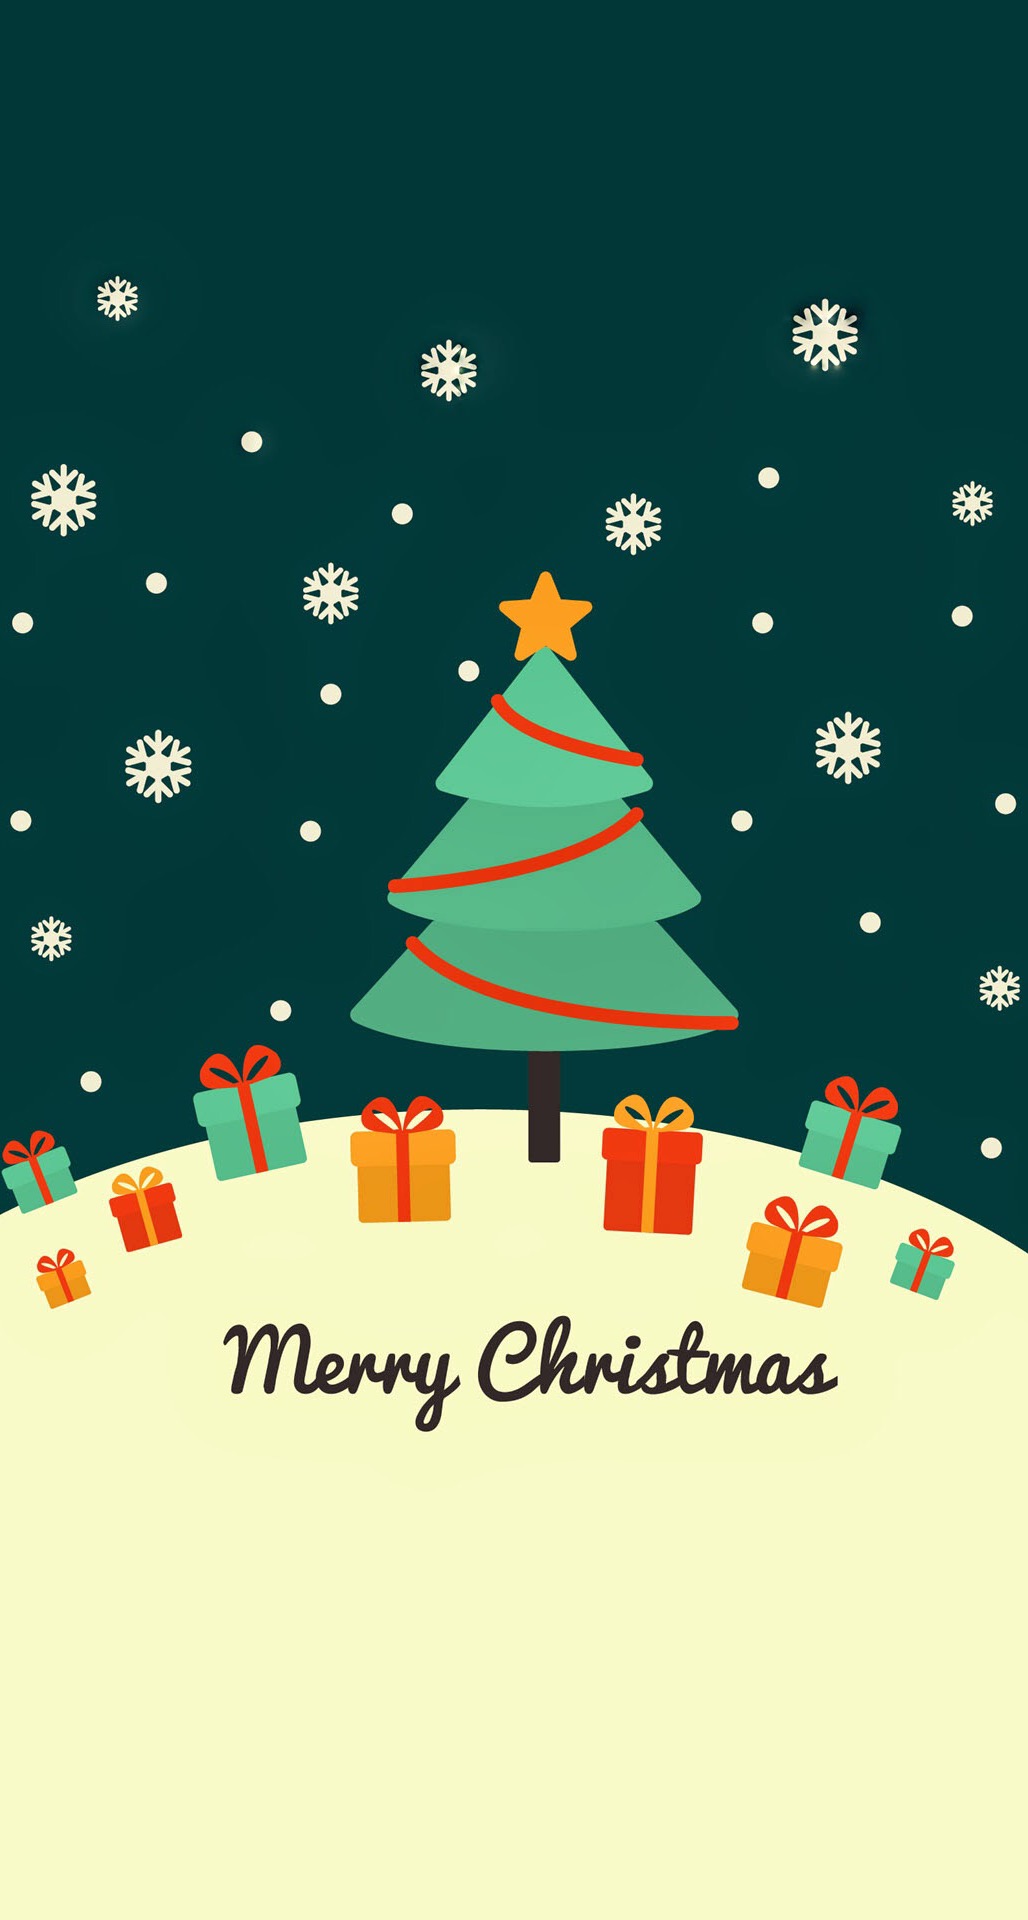 Merry Christmas Wallpaper For Iphone - HD Wallpaper 